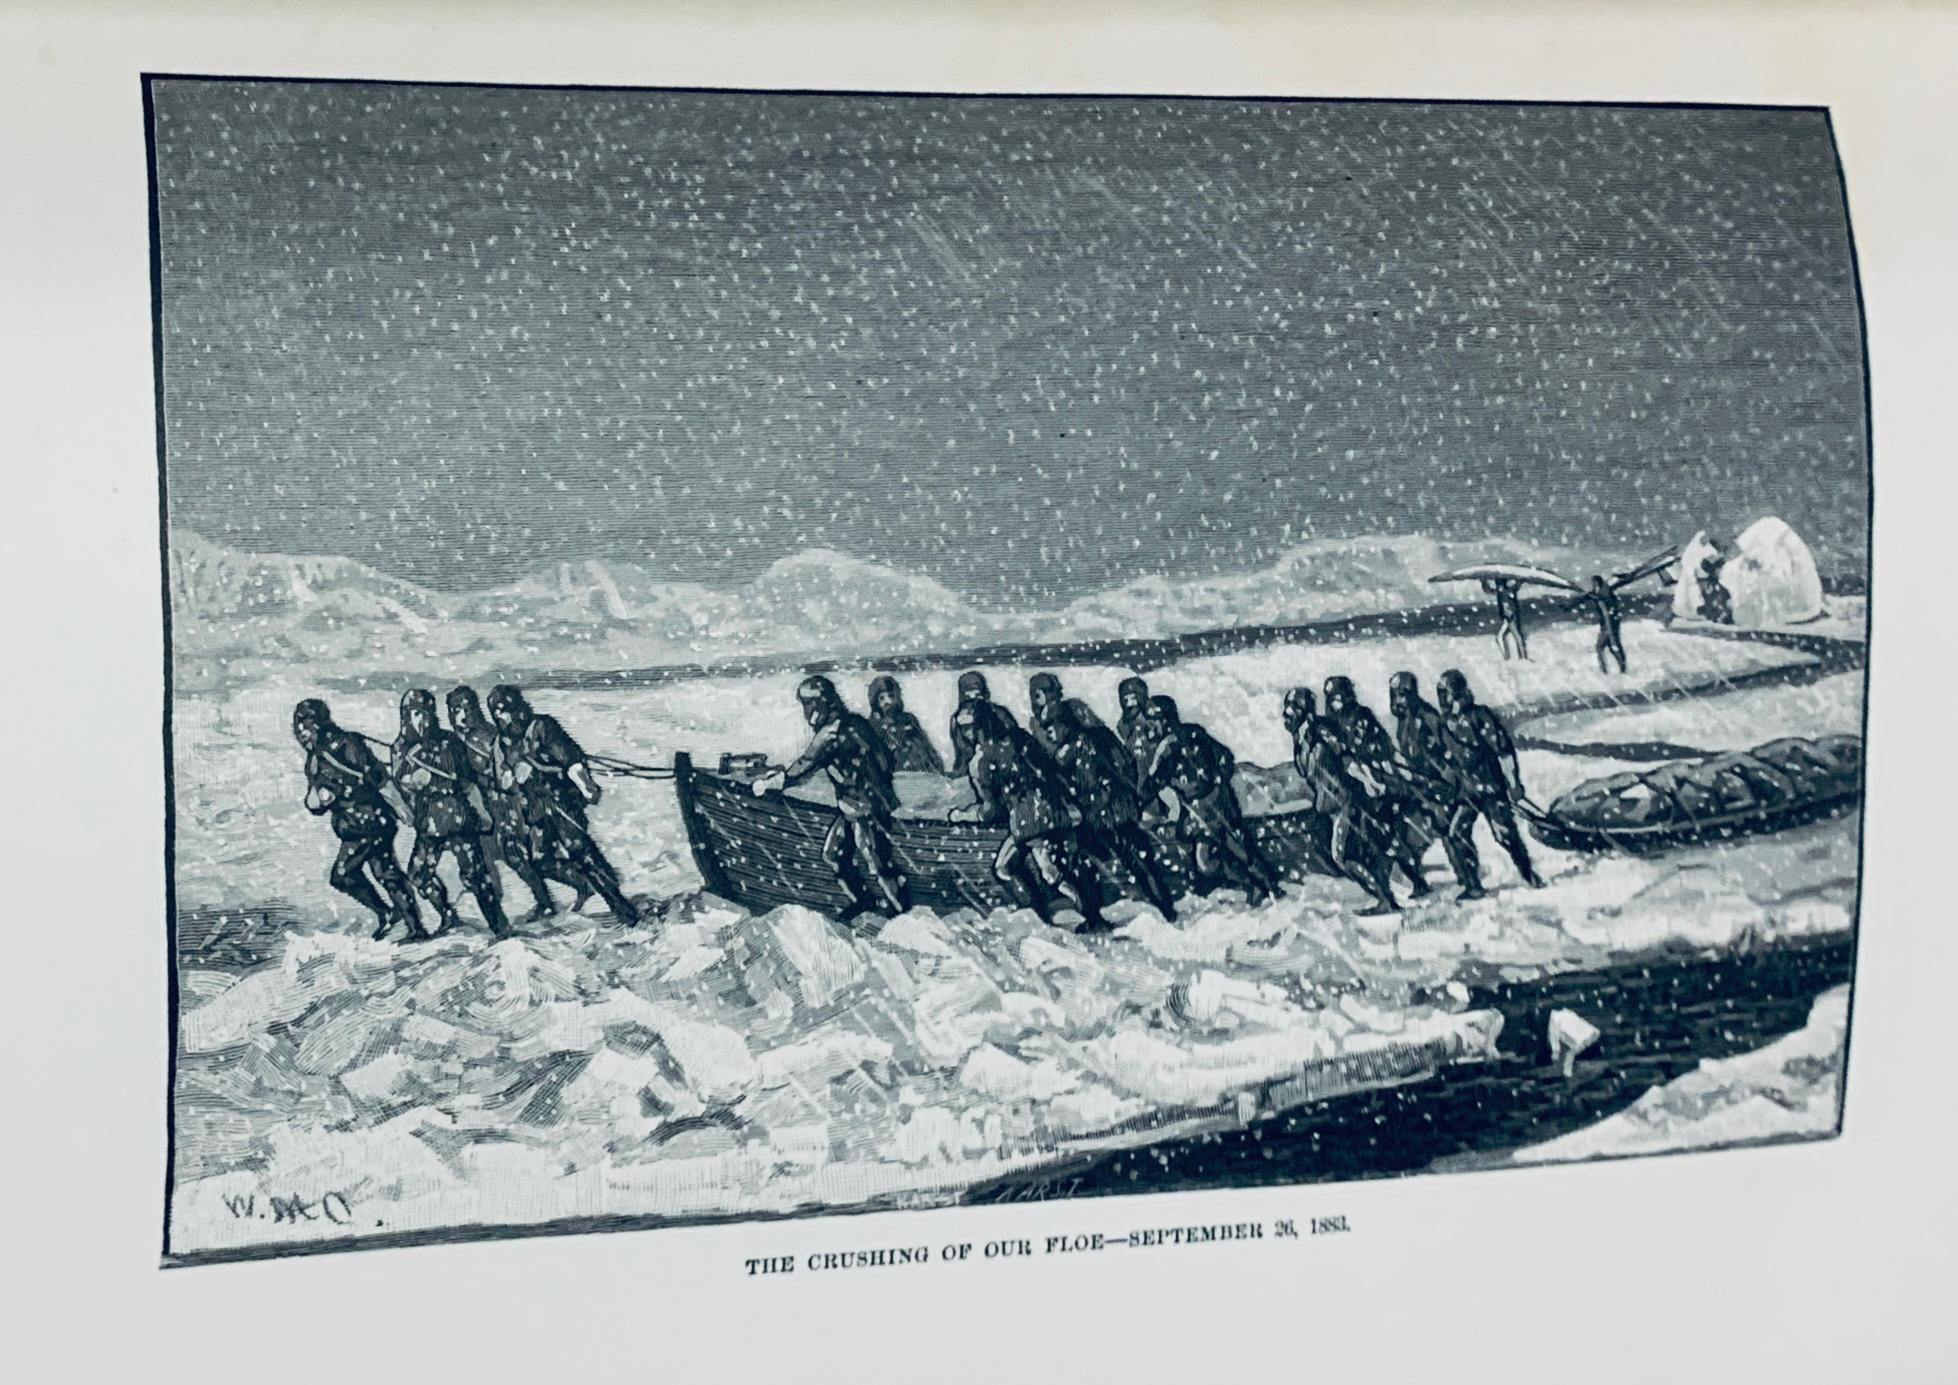 Three Years of ARCTIC SERVICE (1886) An Account of the Lady Franklin Bay Expedition 1881-84